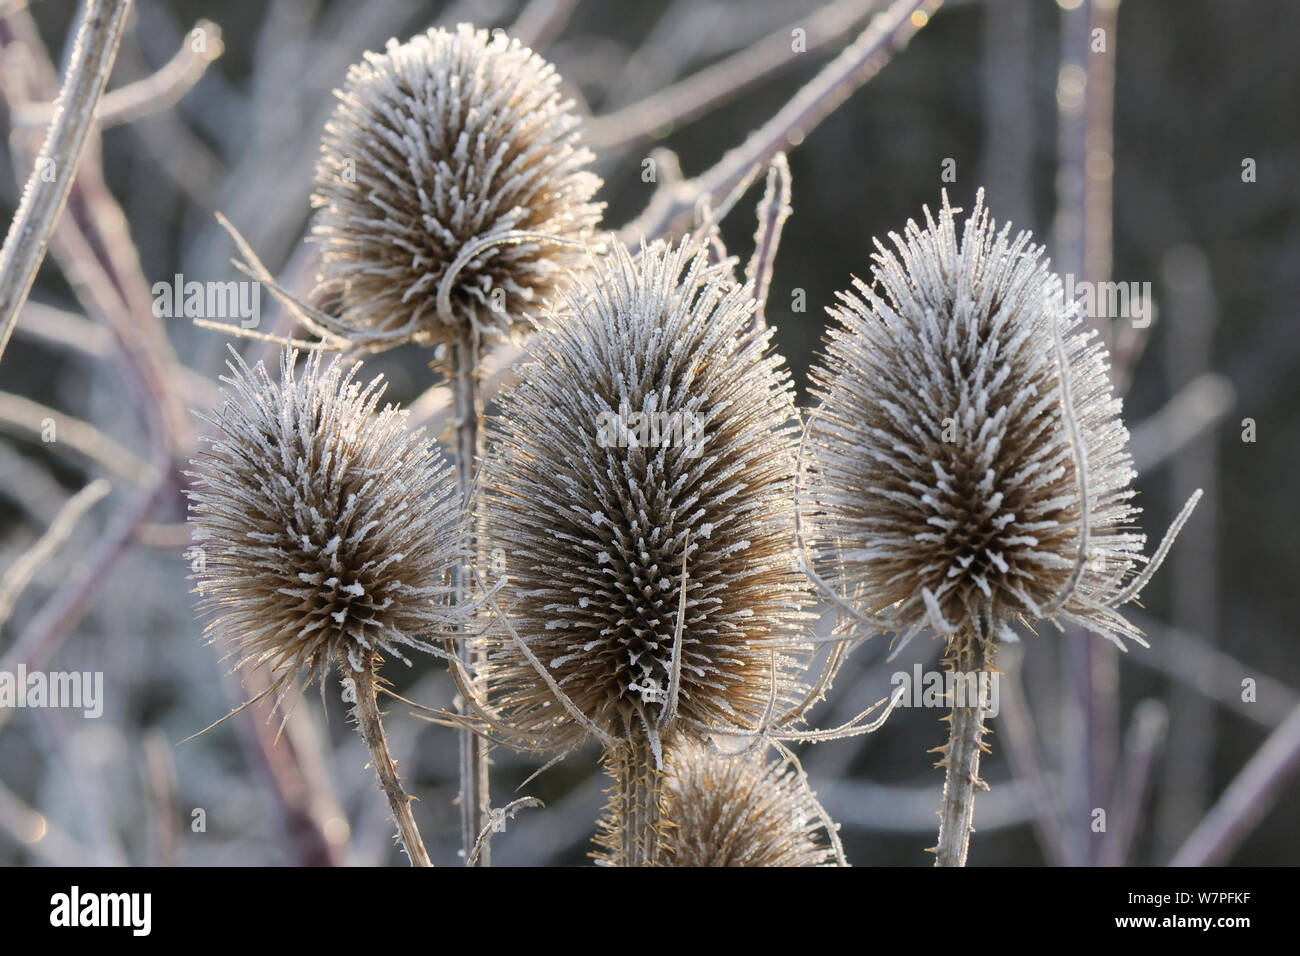 Common teasel (Dipsacus fullonum) seedheads covered with hoar frost, Wiltshire, UK, January. Stock Photo